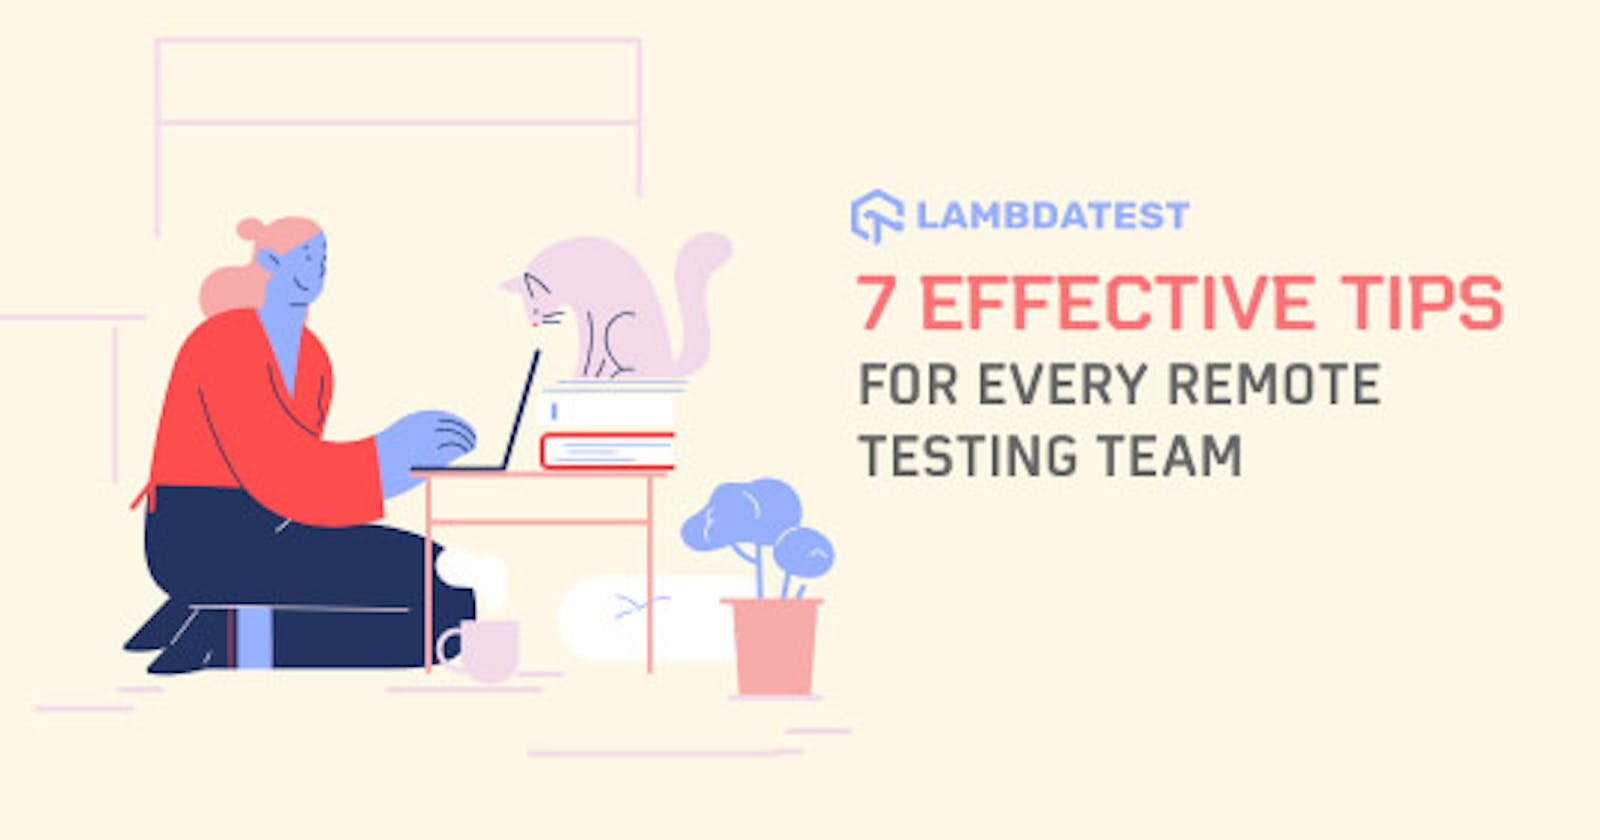 7 Effective Tips For Every Remote Testing Team